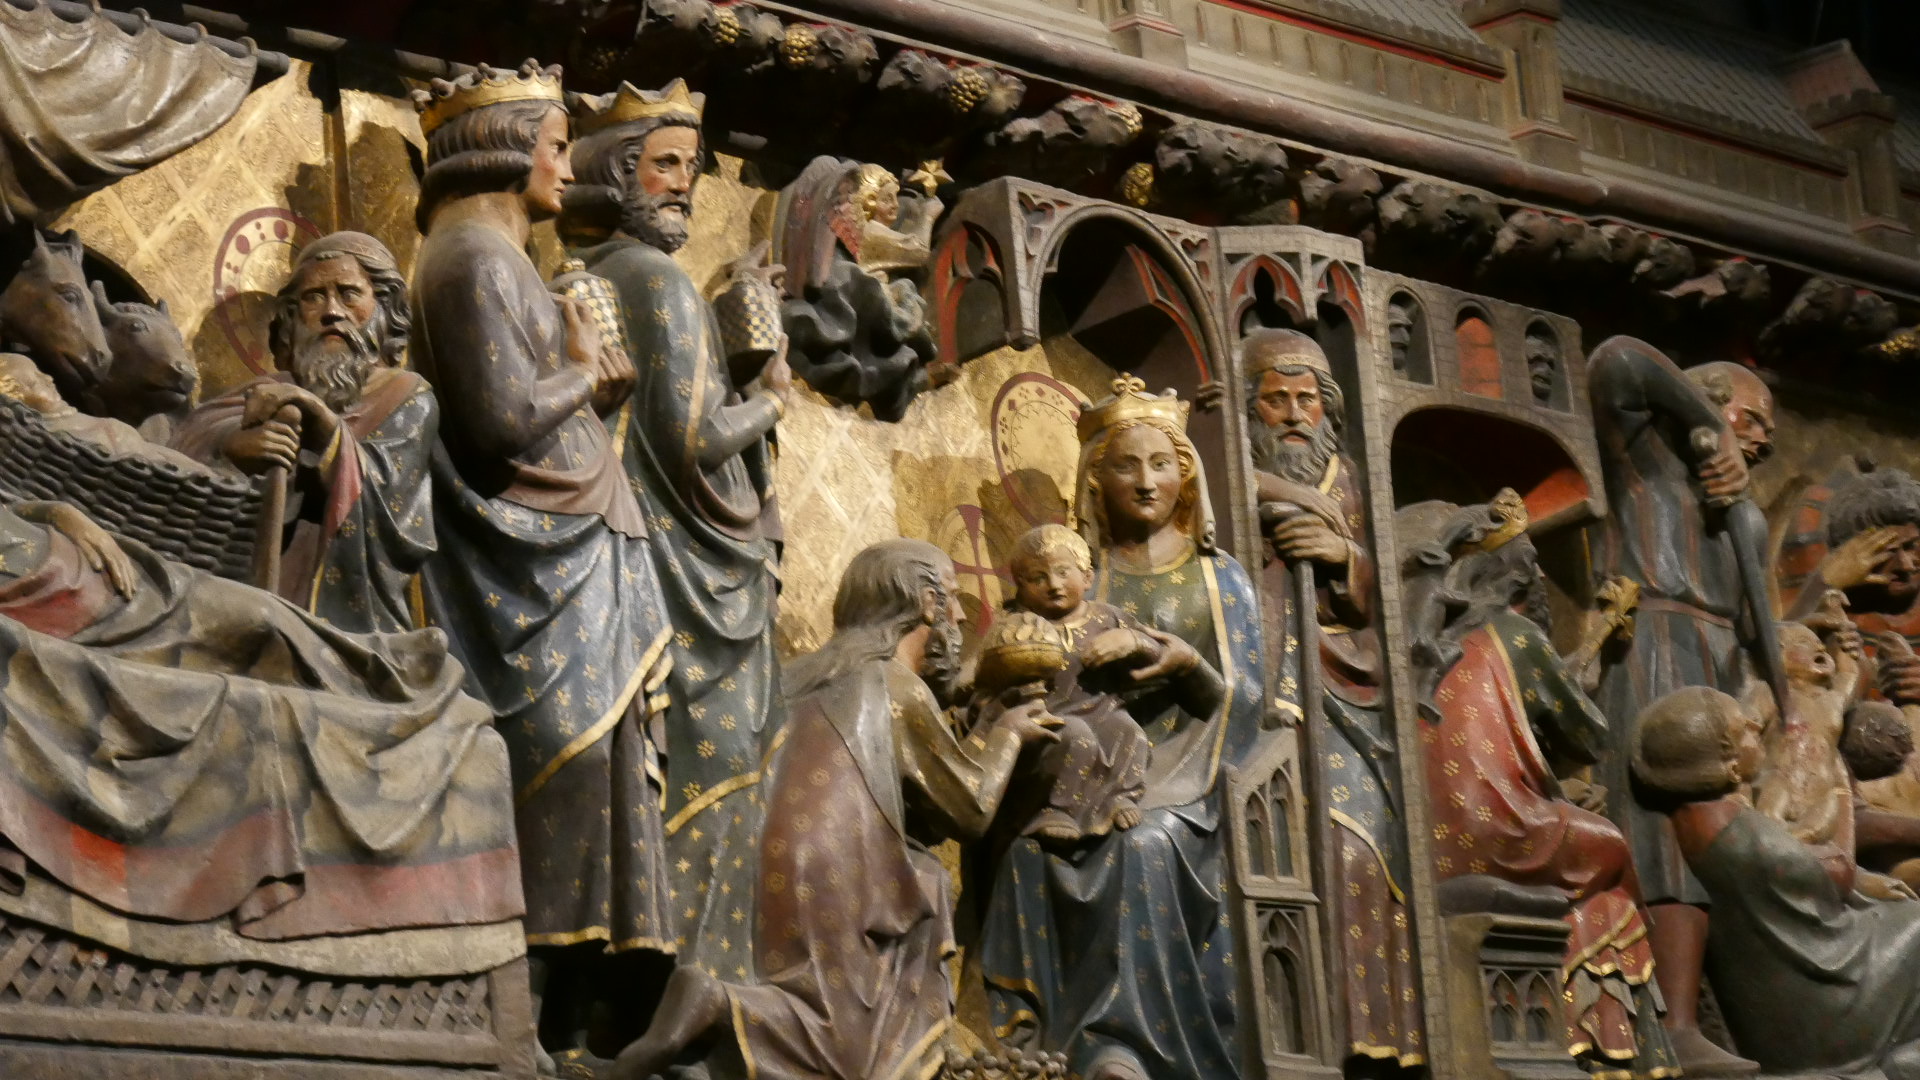 Photo of Close up view of a scene in the Life of the Virgin Mary with the Baby Jesus and the Wise Men paying homage to him on one of the 2 giant wooden carvings.